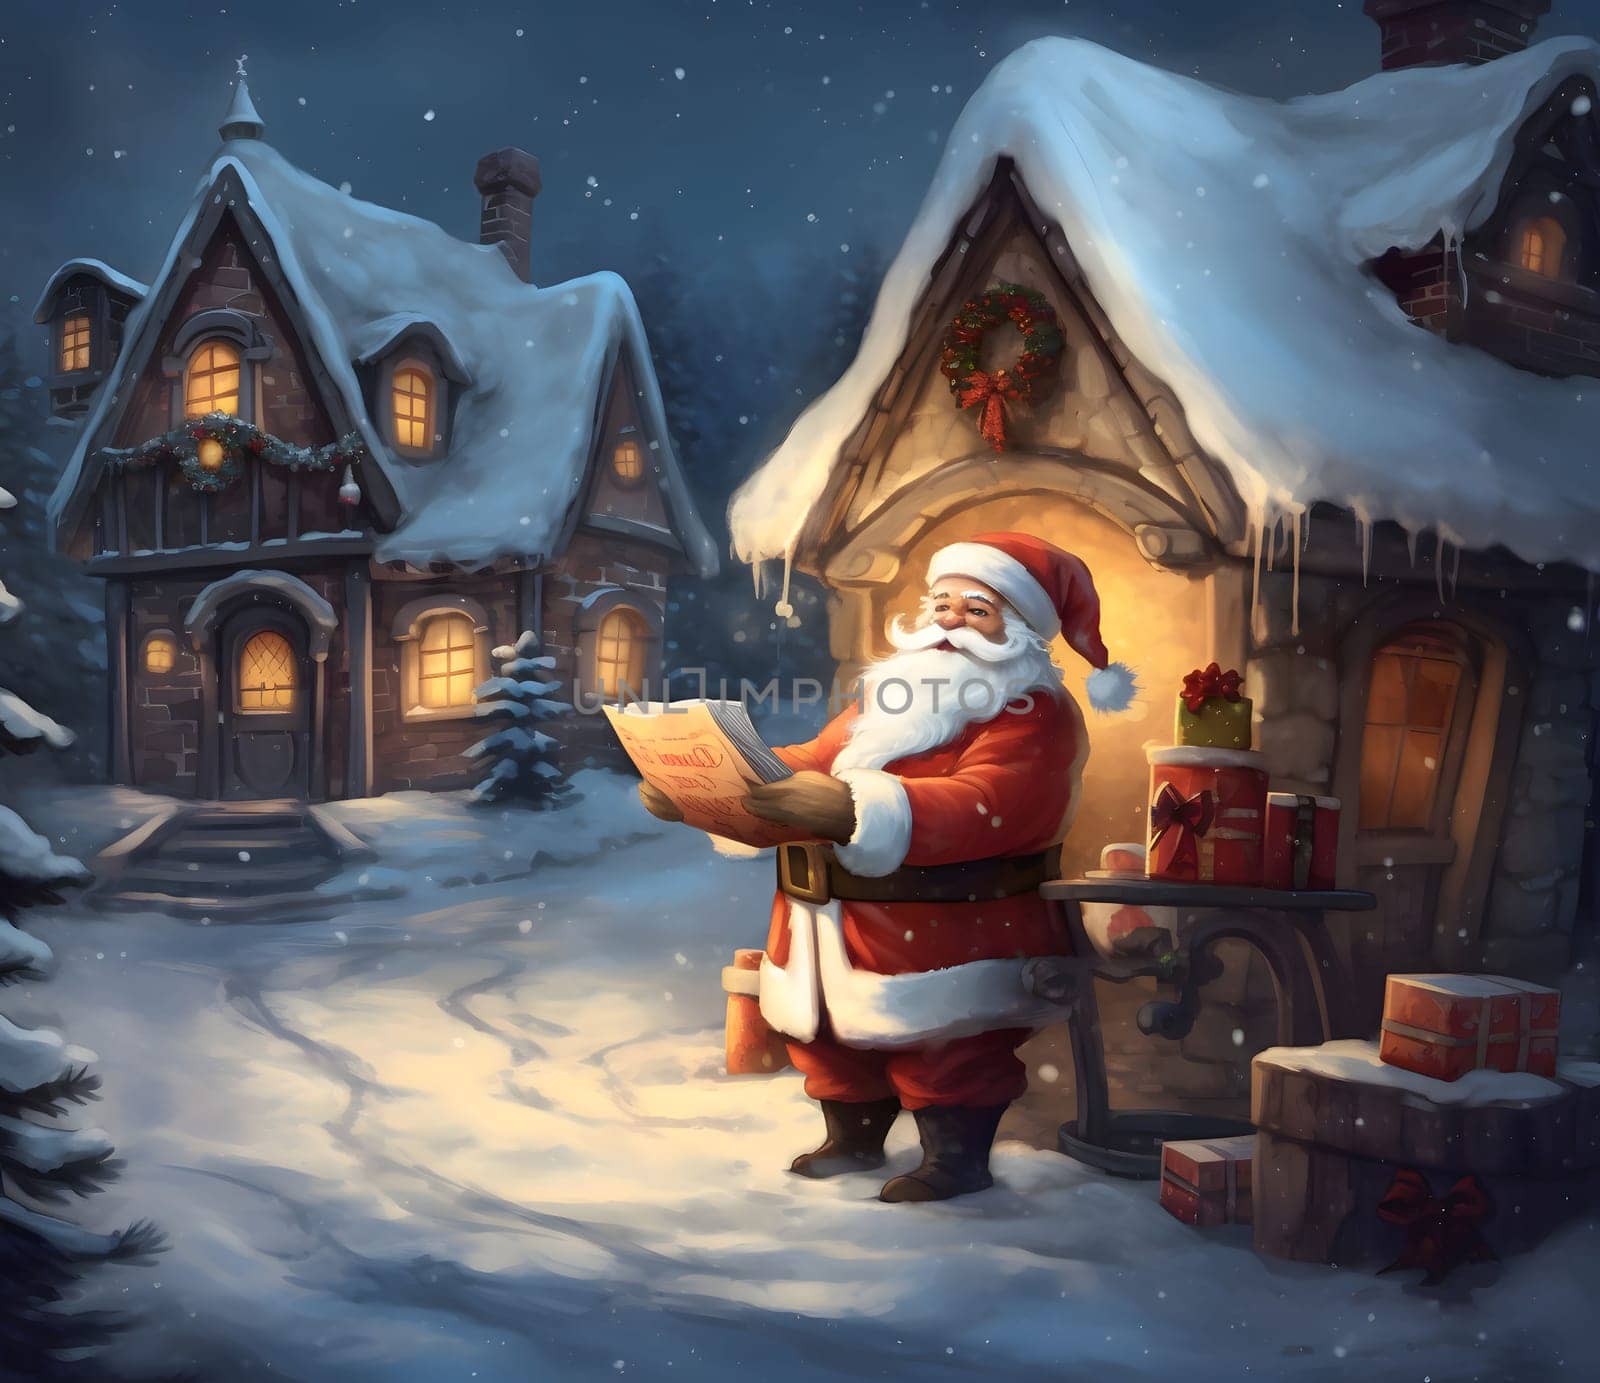 Illustration of Santa Claus reading a letter in front of his hut, winter night scenery. Christmas card as a symbol of remembrance of the birth of the Savior. by ThemesS